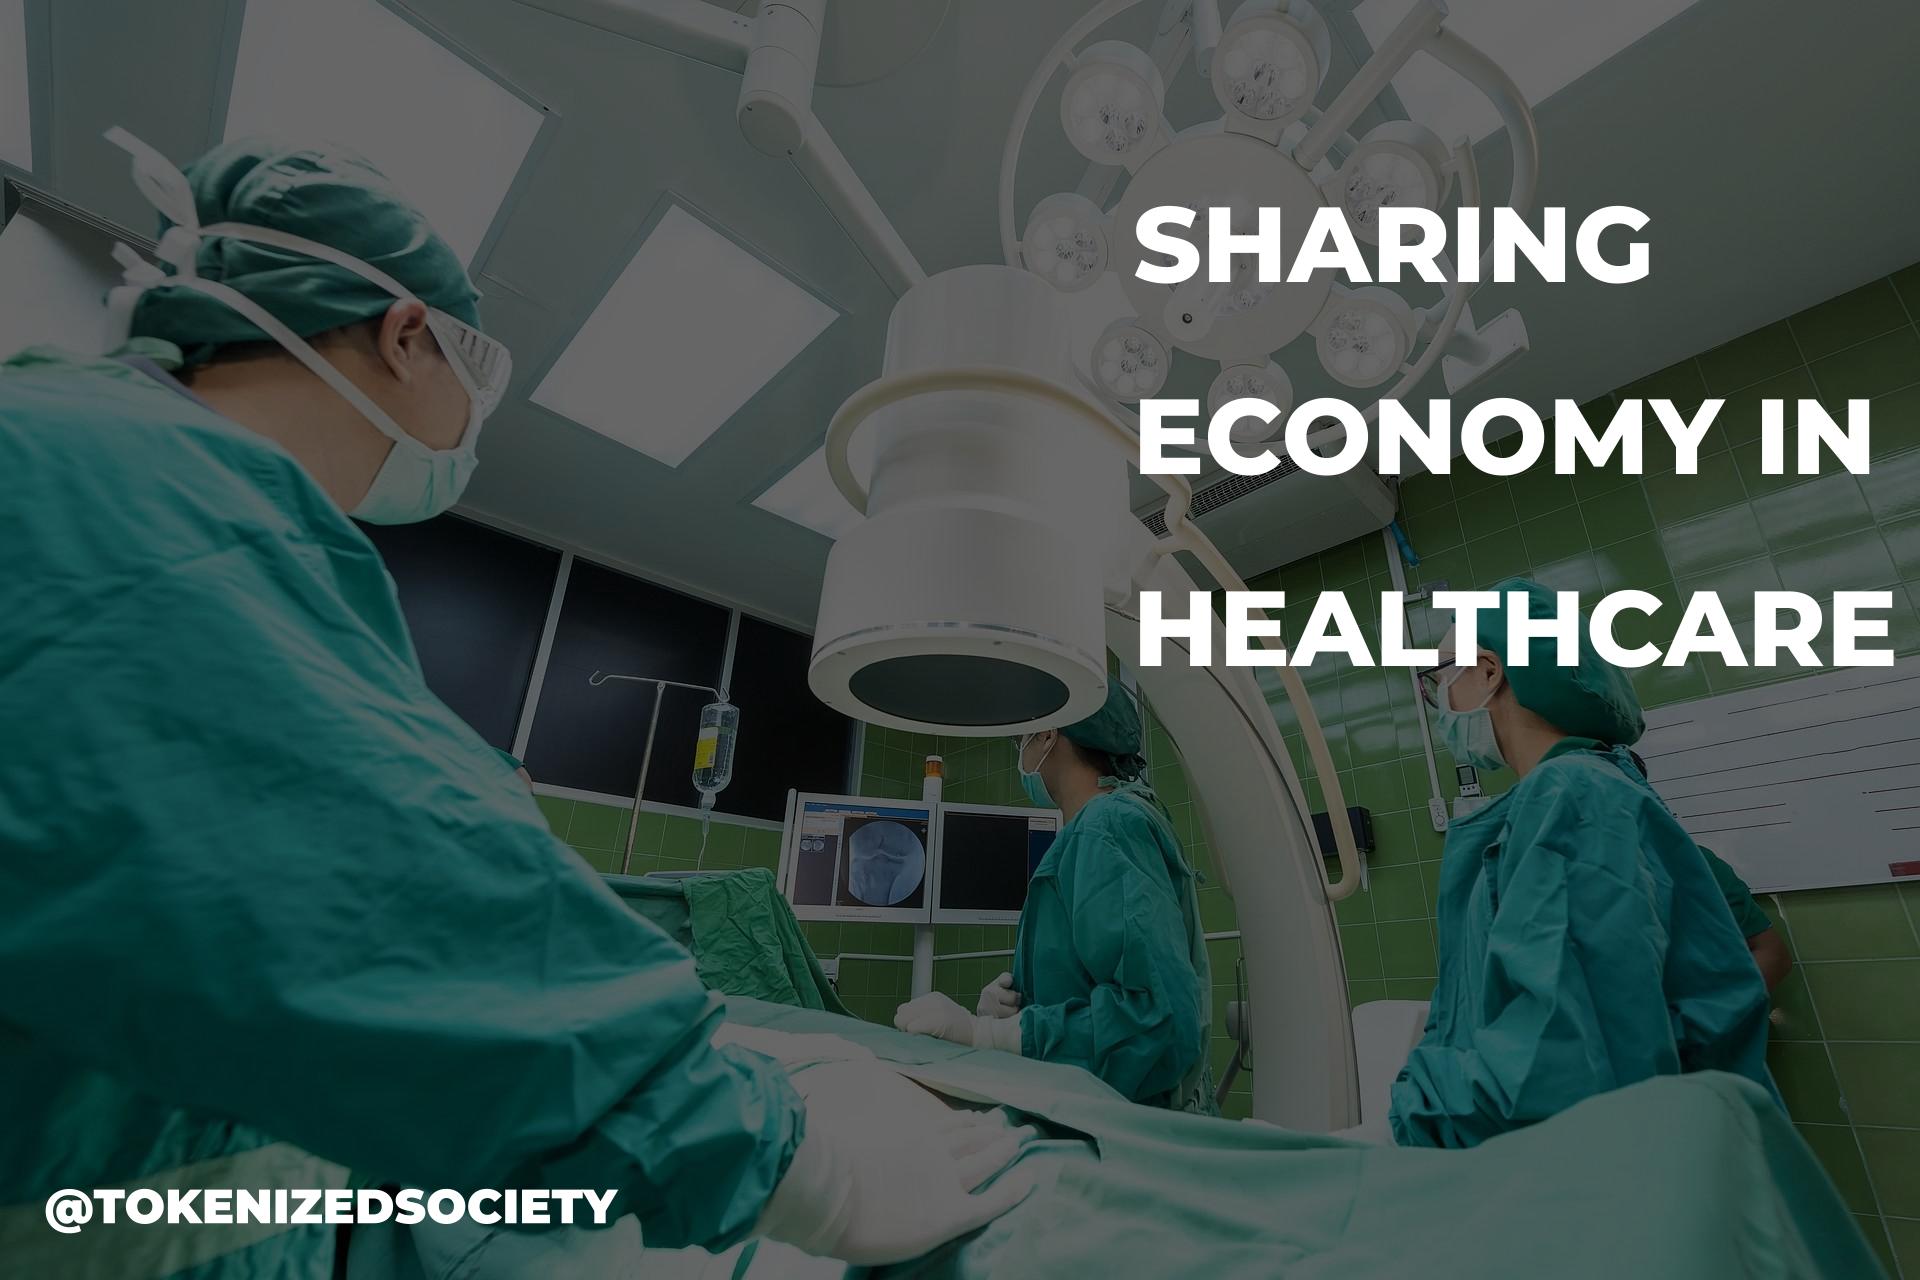 @tokenizedsociety/sharing-economy-in-healthcare-the-case-of-hdcare